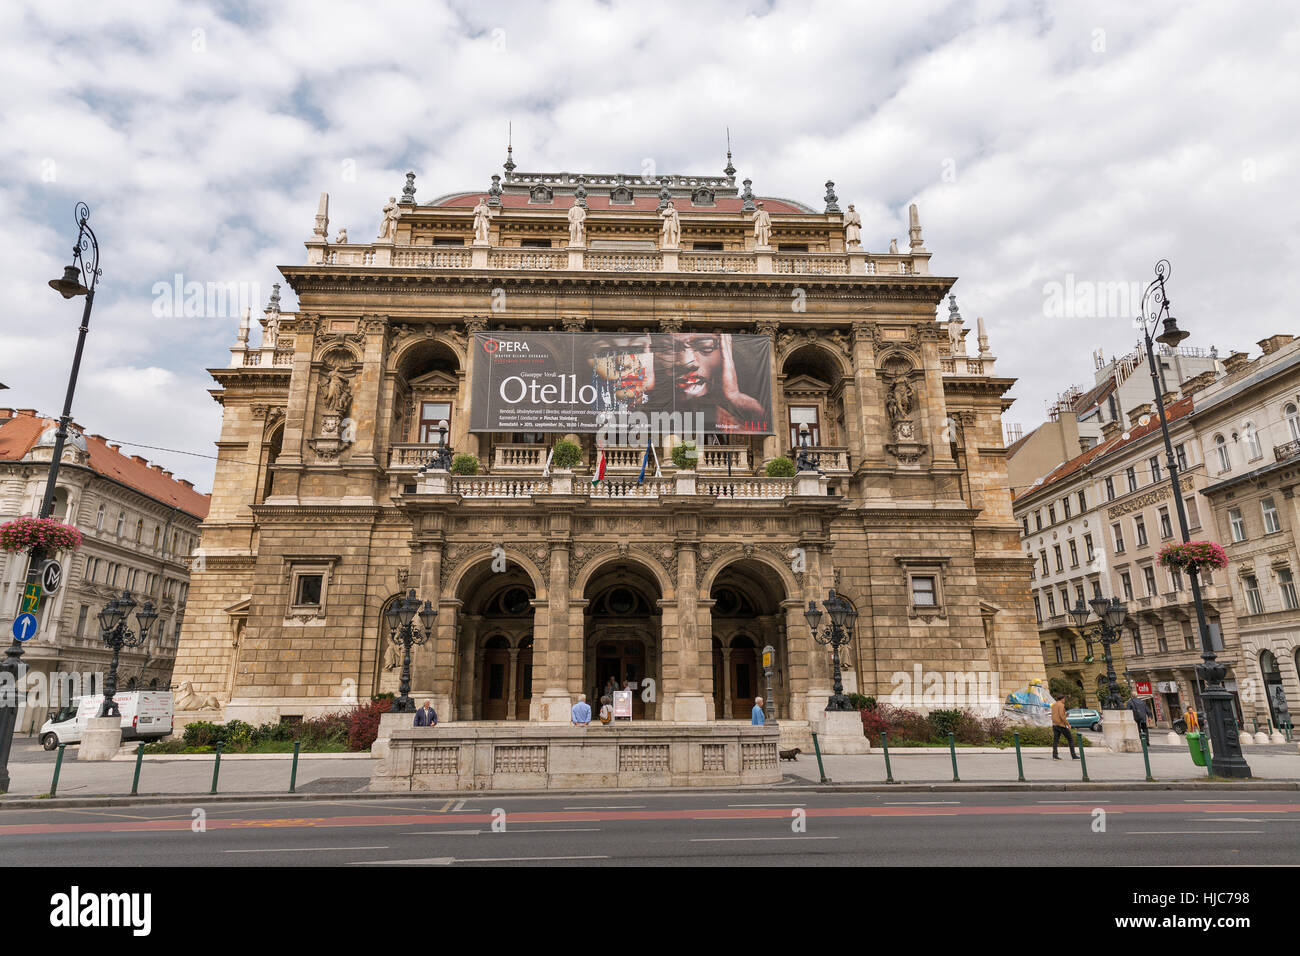 BUDAPEST, HUNGARY - SEPTEMBER 24, 2015:  Unrecognized people walk in front of Hungarian State Opera House building. The Opera House is a neo-renaissan Stock Photo